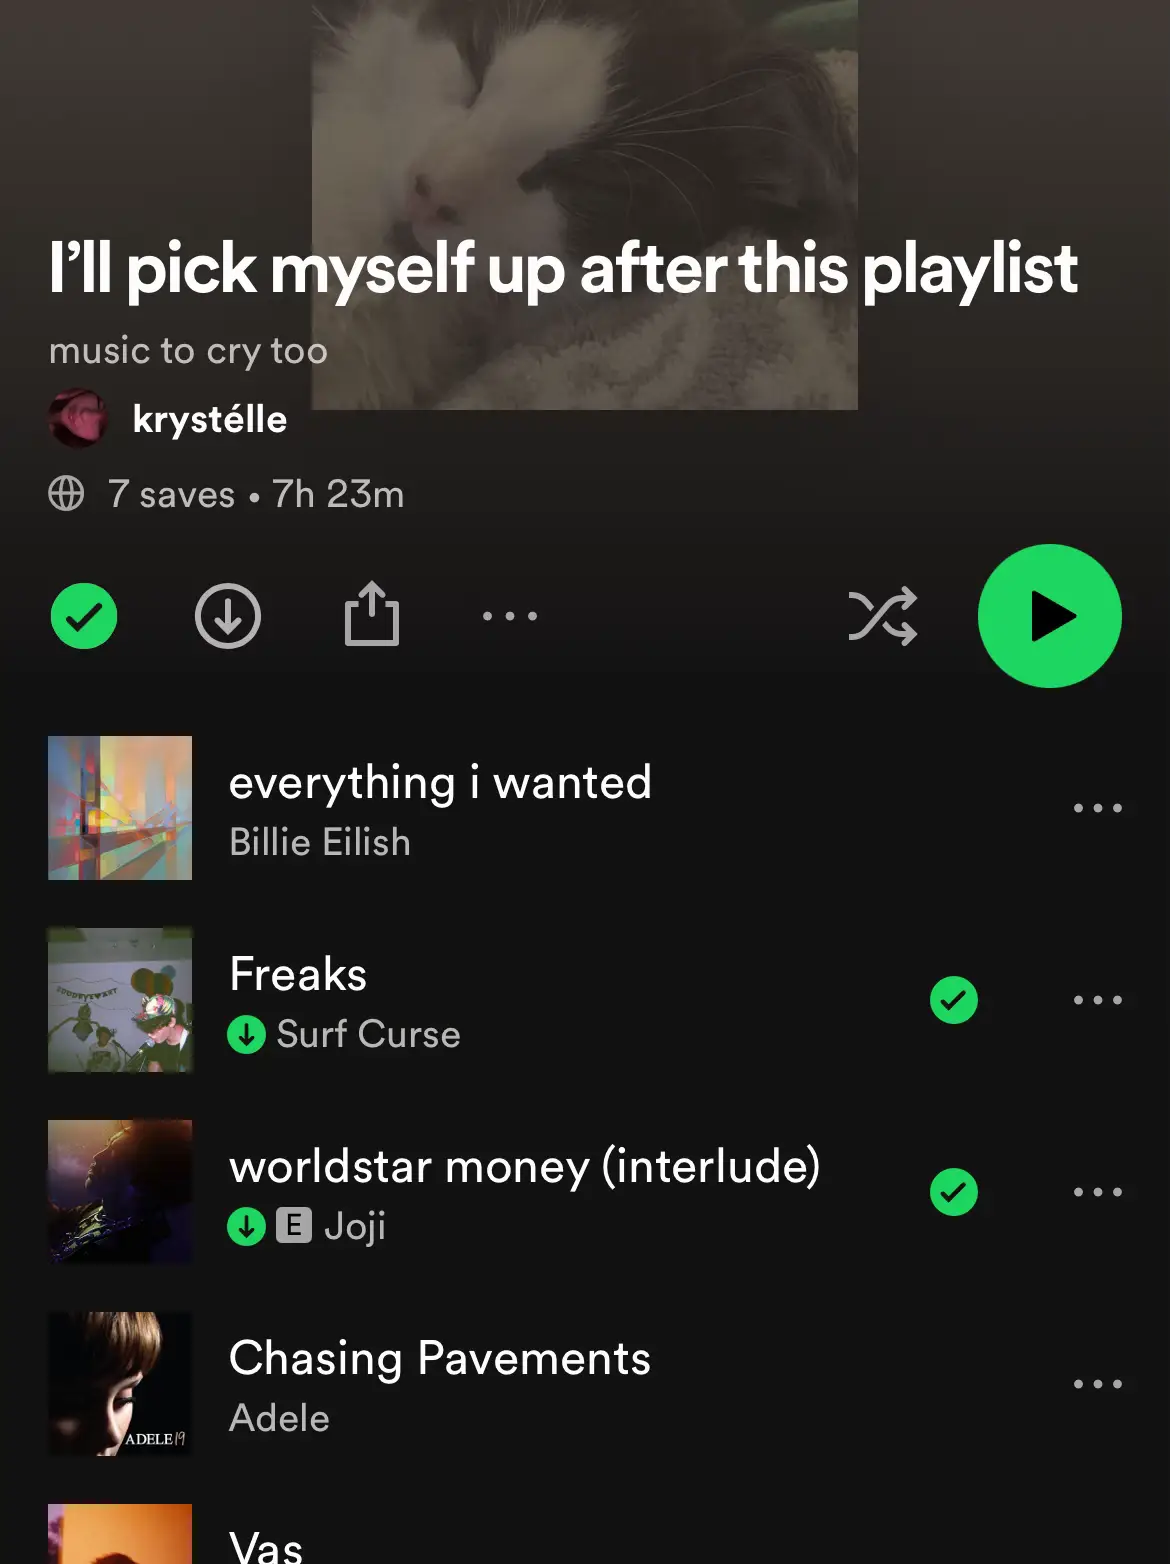  A playlist of music to cry to with the words "I'll pick myself up after this playlist" at the top.